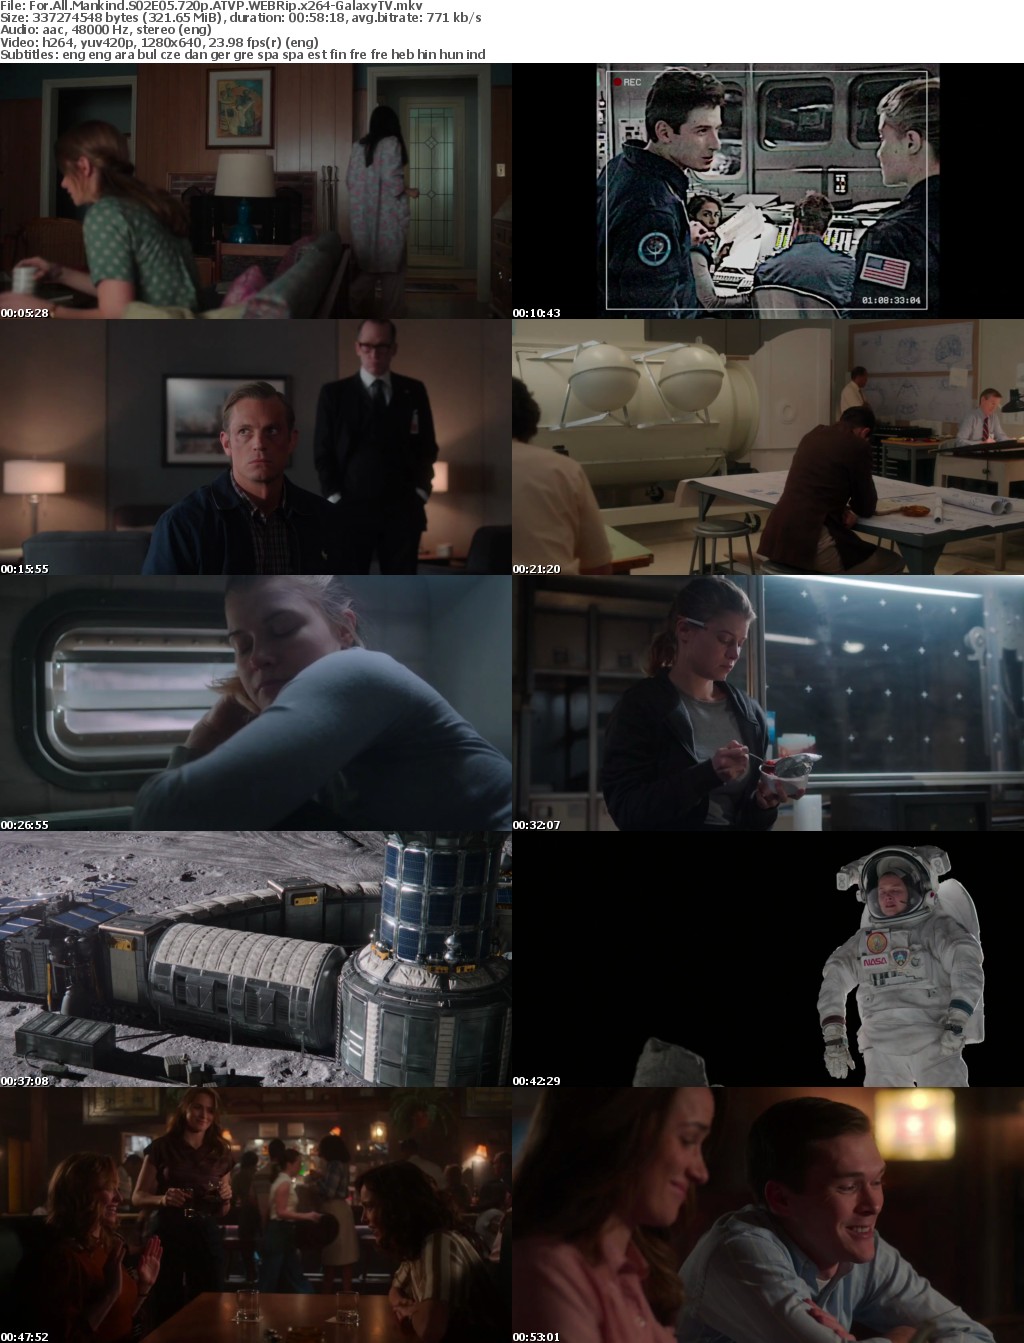 For All Mankind S02 COMPLETE 720p ATVP WEBRip x264-GalaxyTV